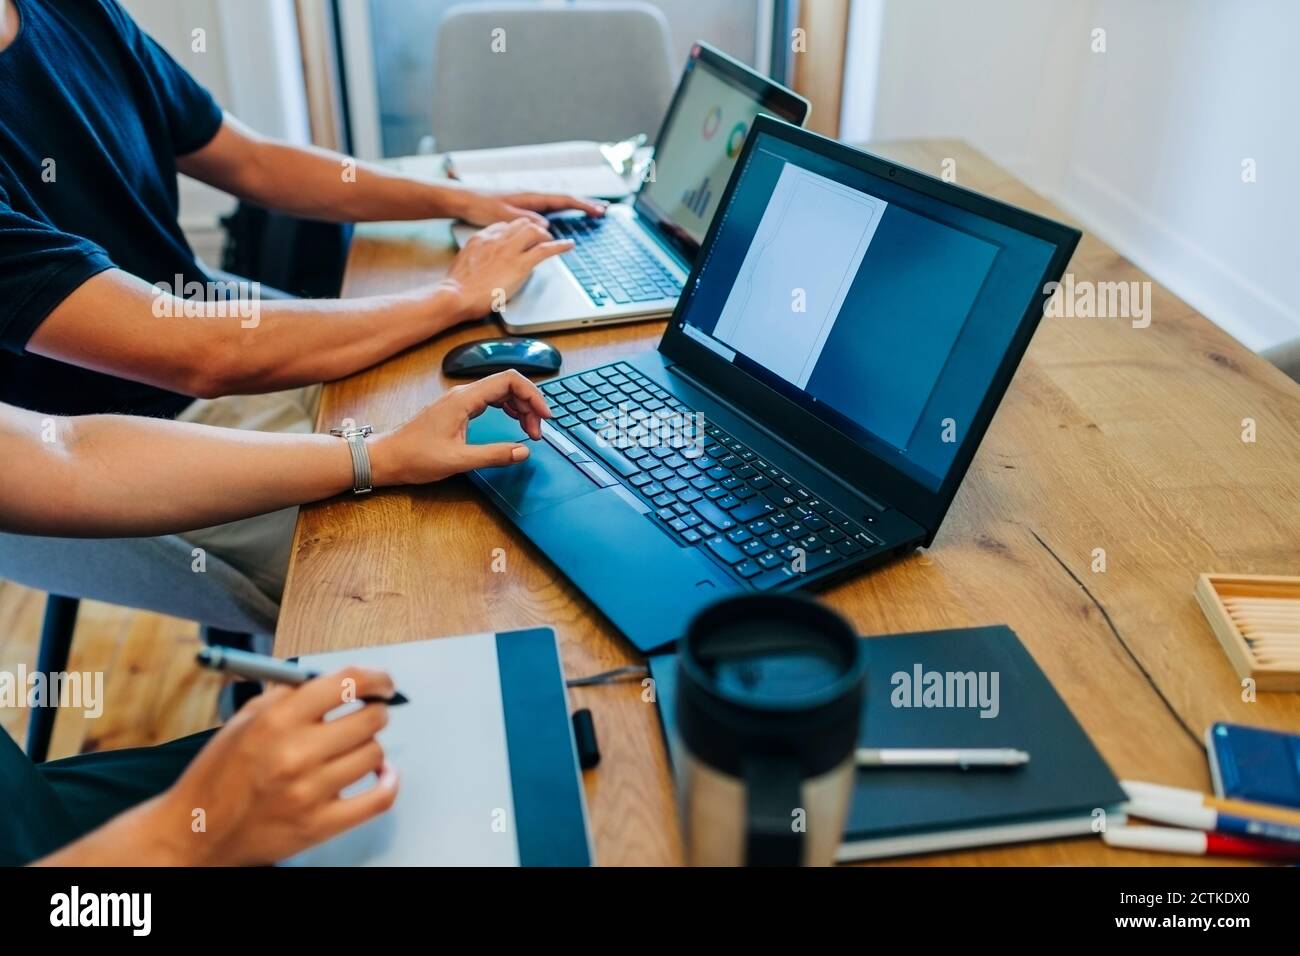 Web designers working while using laptop at office desk Stock Photo